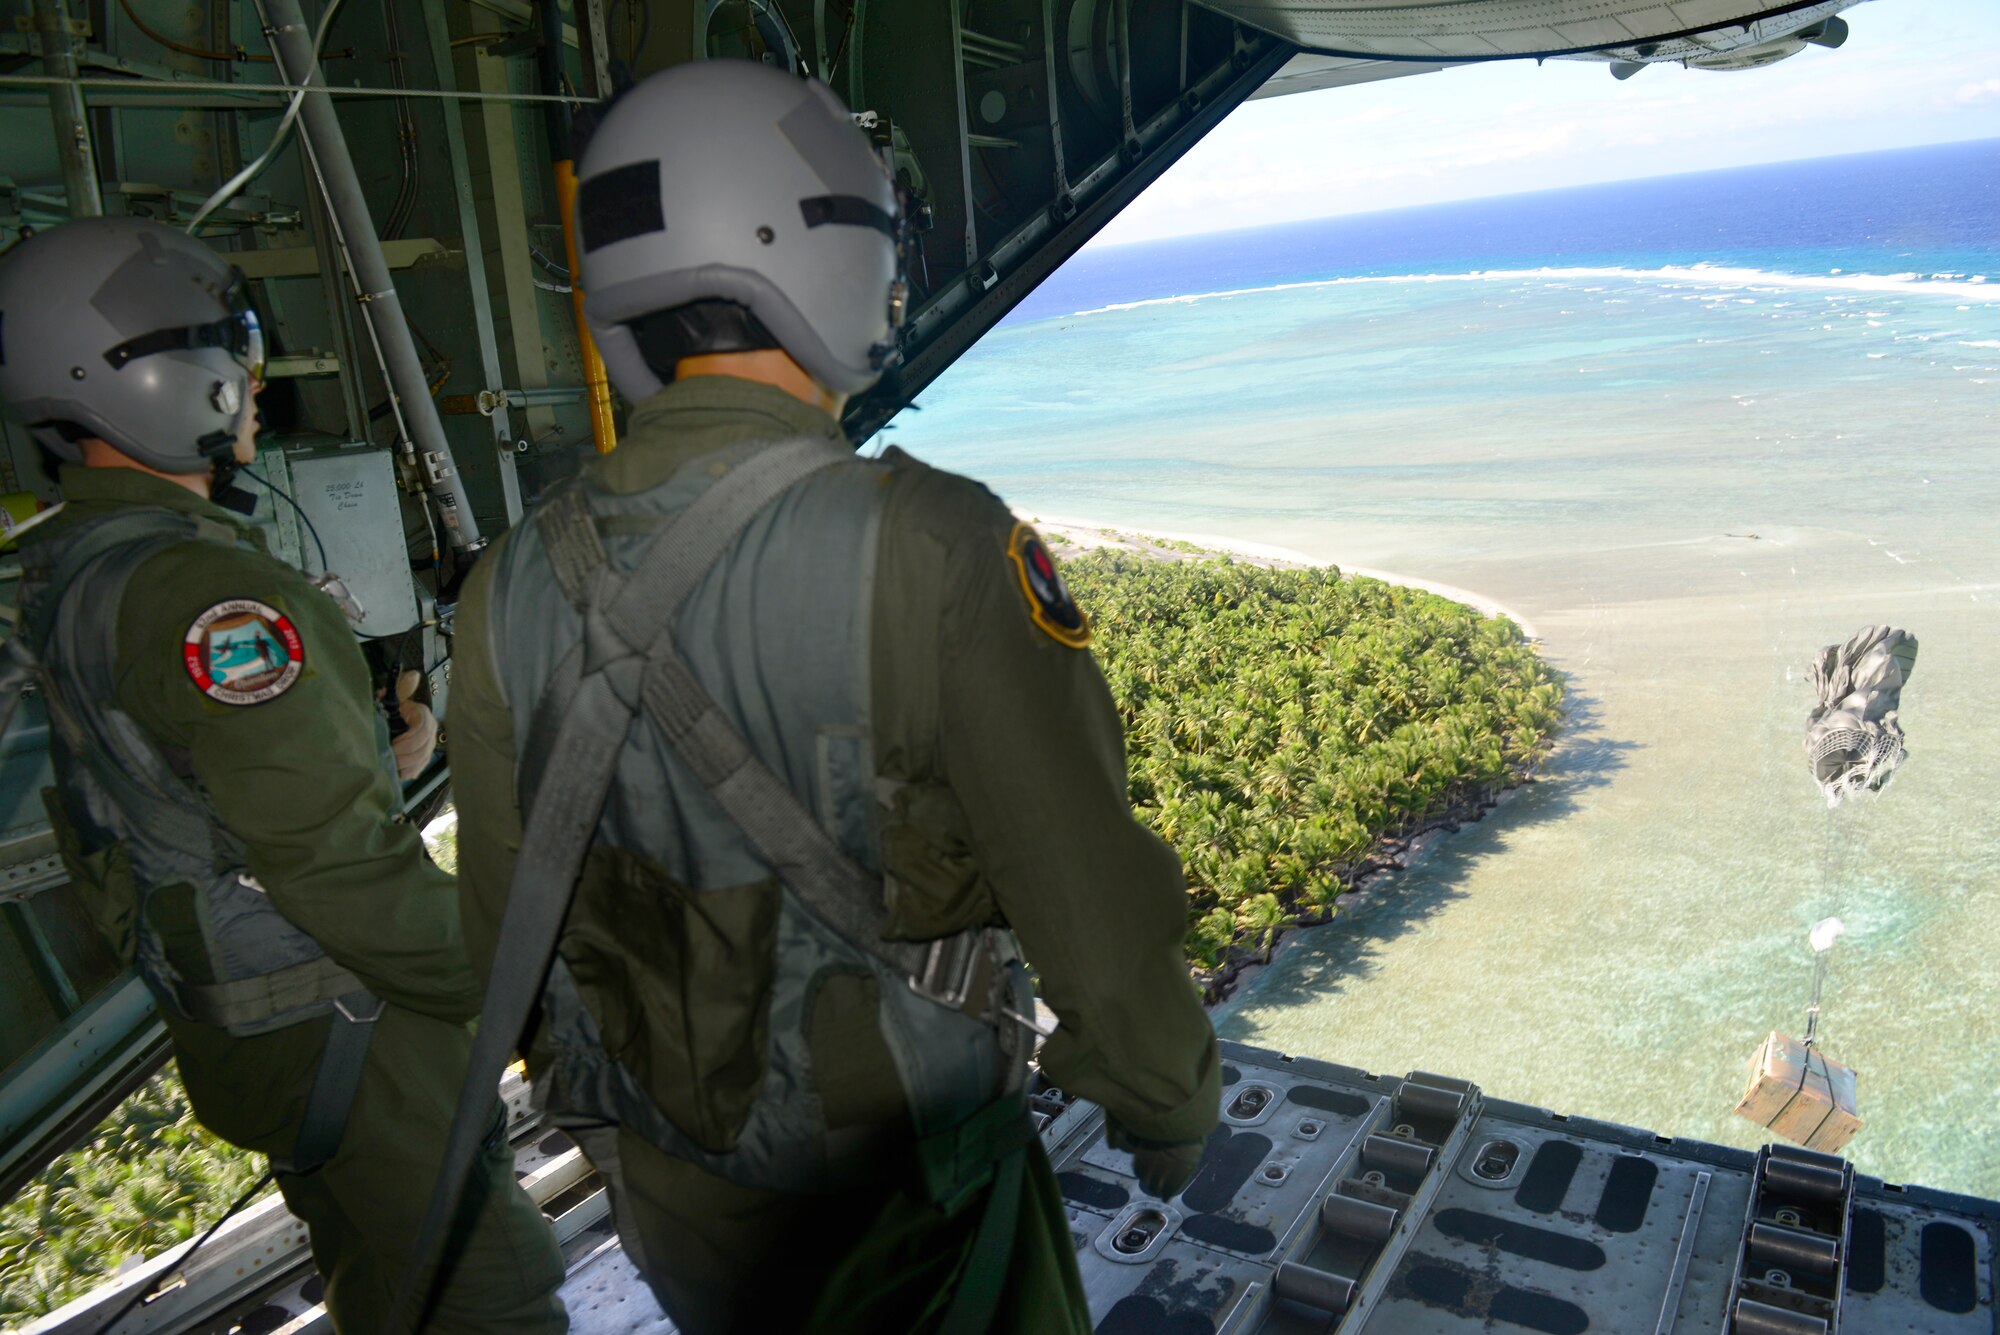 Staff Sgt. Renford Forbes, left, and Capt. Robert Tong deliver a low-cost, low-altitude airdrop bundle containing relief supplies from a C-130H aircraft to the island of Ifalik, Federated States of Micronesia, during Operation Christmas Drop Dec. 10, 2013. Forbes is a loadmaster assigned to the 36th Airlift Squadron, Yokota Air Base, Japan, and Tong is a flight surgeon assigned to the 36th Medical Group, Andersen Air Force Base, Guam. This year marks the 62nd year of Operation Christmas Drop, which began in 1952, making it the world's longest running airdrop mission. Every December, C-130 Hercules crews from the 374th Airlift Wing at Yokota Air Base, Japan, partner with the 36th Wing at Andersen Air Force Base, Guam, to airlift food, supplies and toys to islanders throughout Micronesia. (U.S. Air Force photo by 2nd Lt. Jake Bailey/Released)